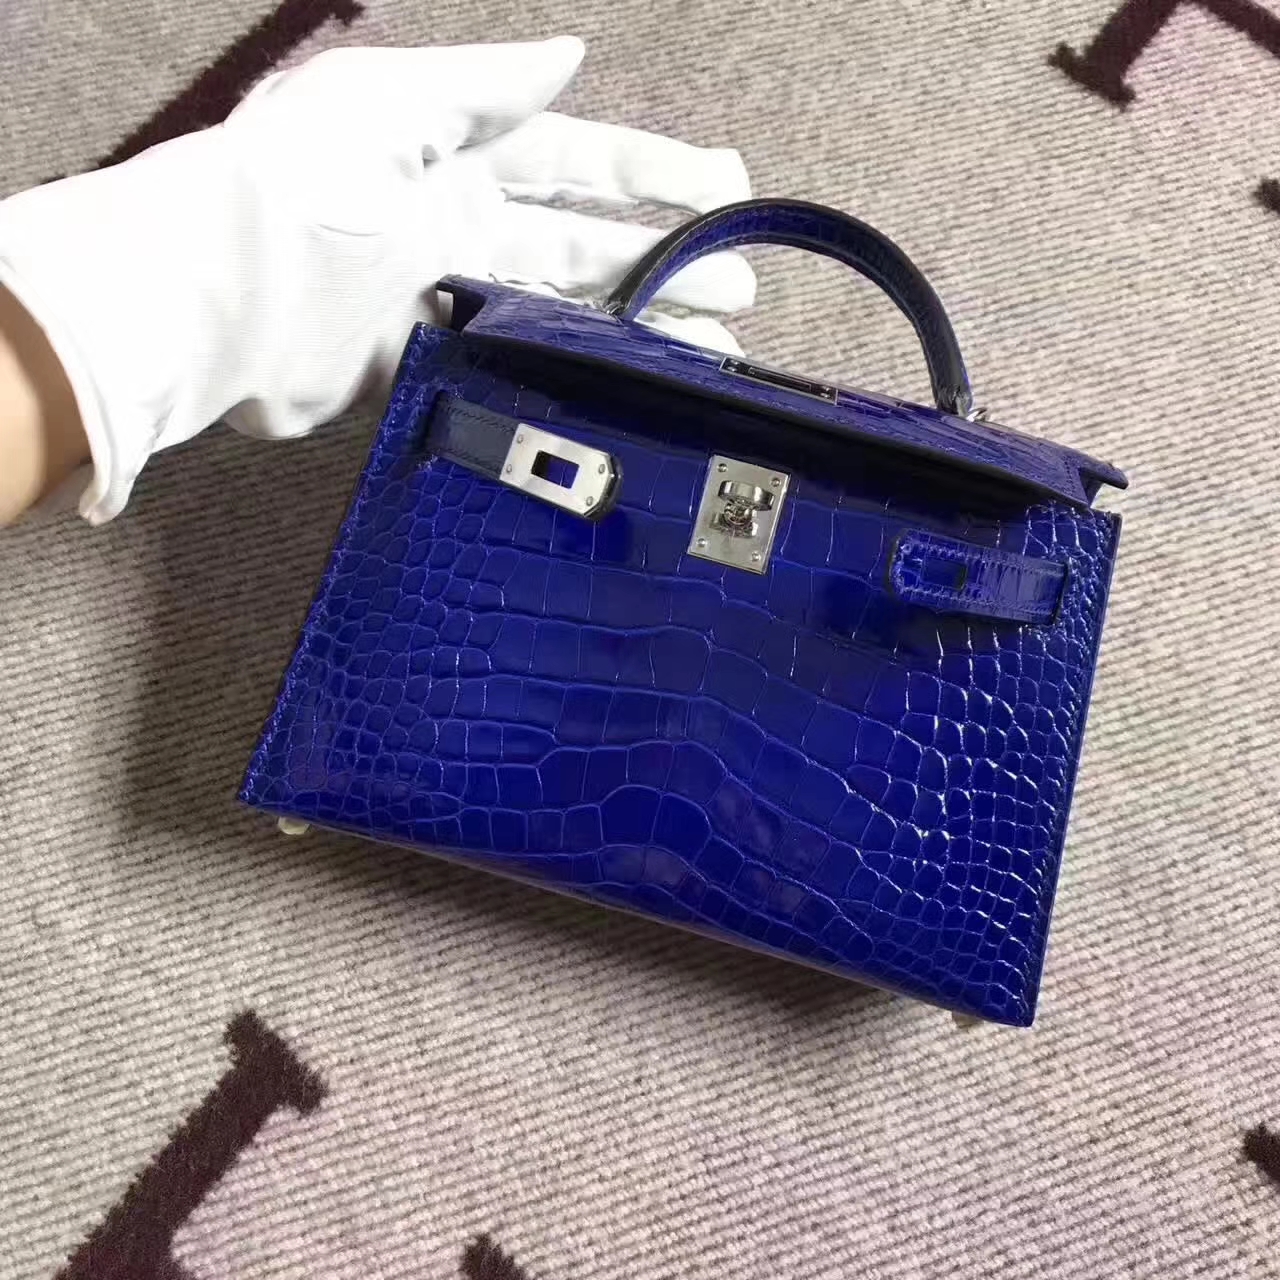 Hot Sale Hermes 7T Blue Electric Crocodile Shiny Leather Minikelly-2 Clutch Bag